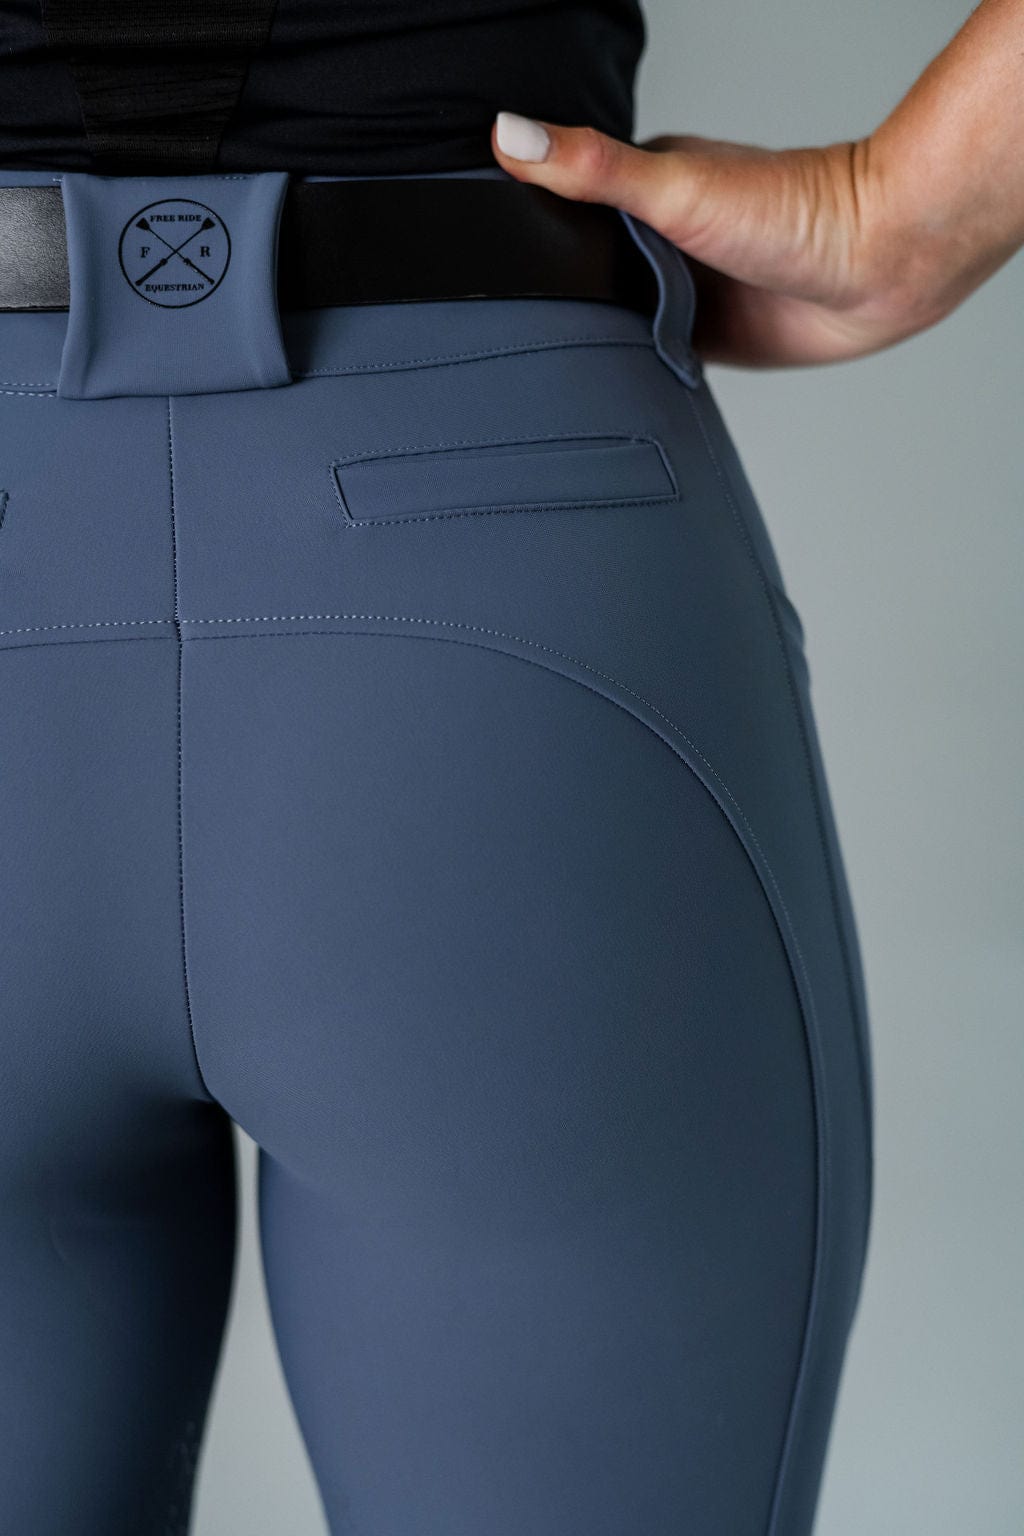 Horze Ada Women's Silicone Full Seat Breeches with Phone Pocket - Grey -  Horse and Rider Supplies